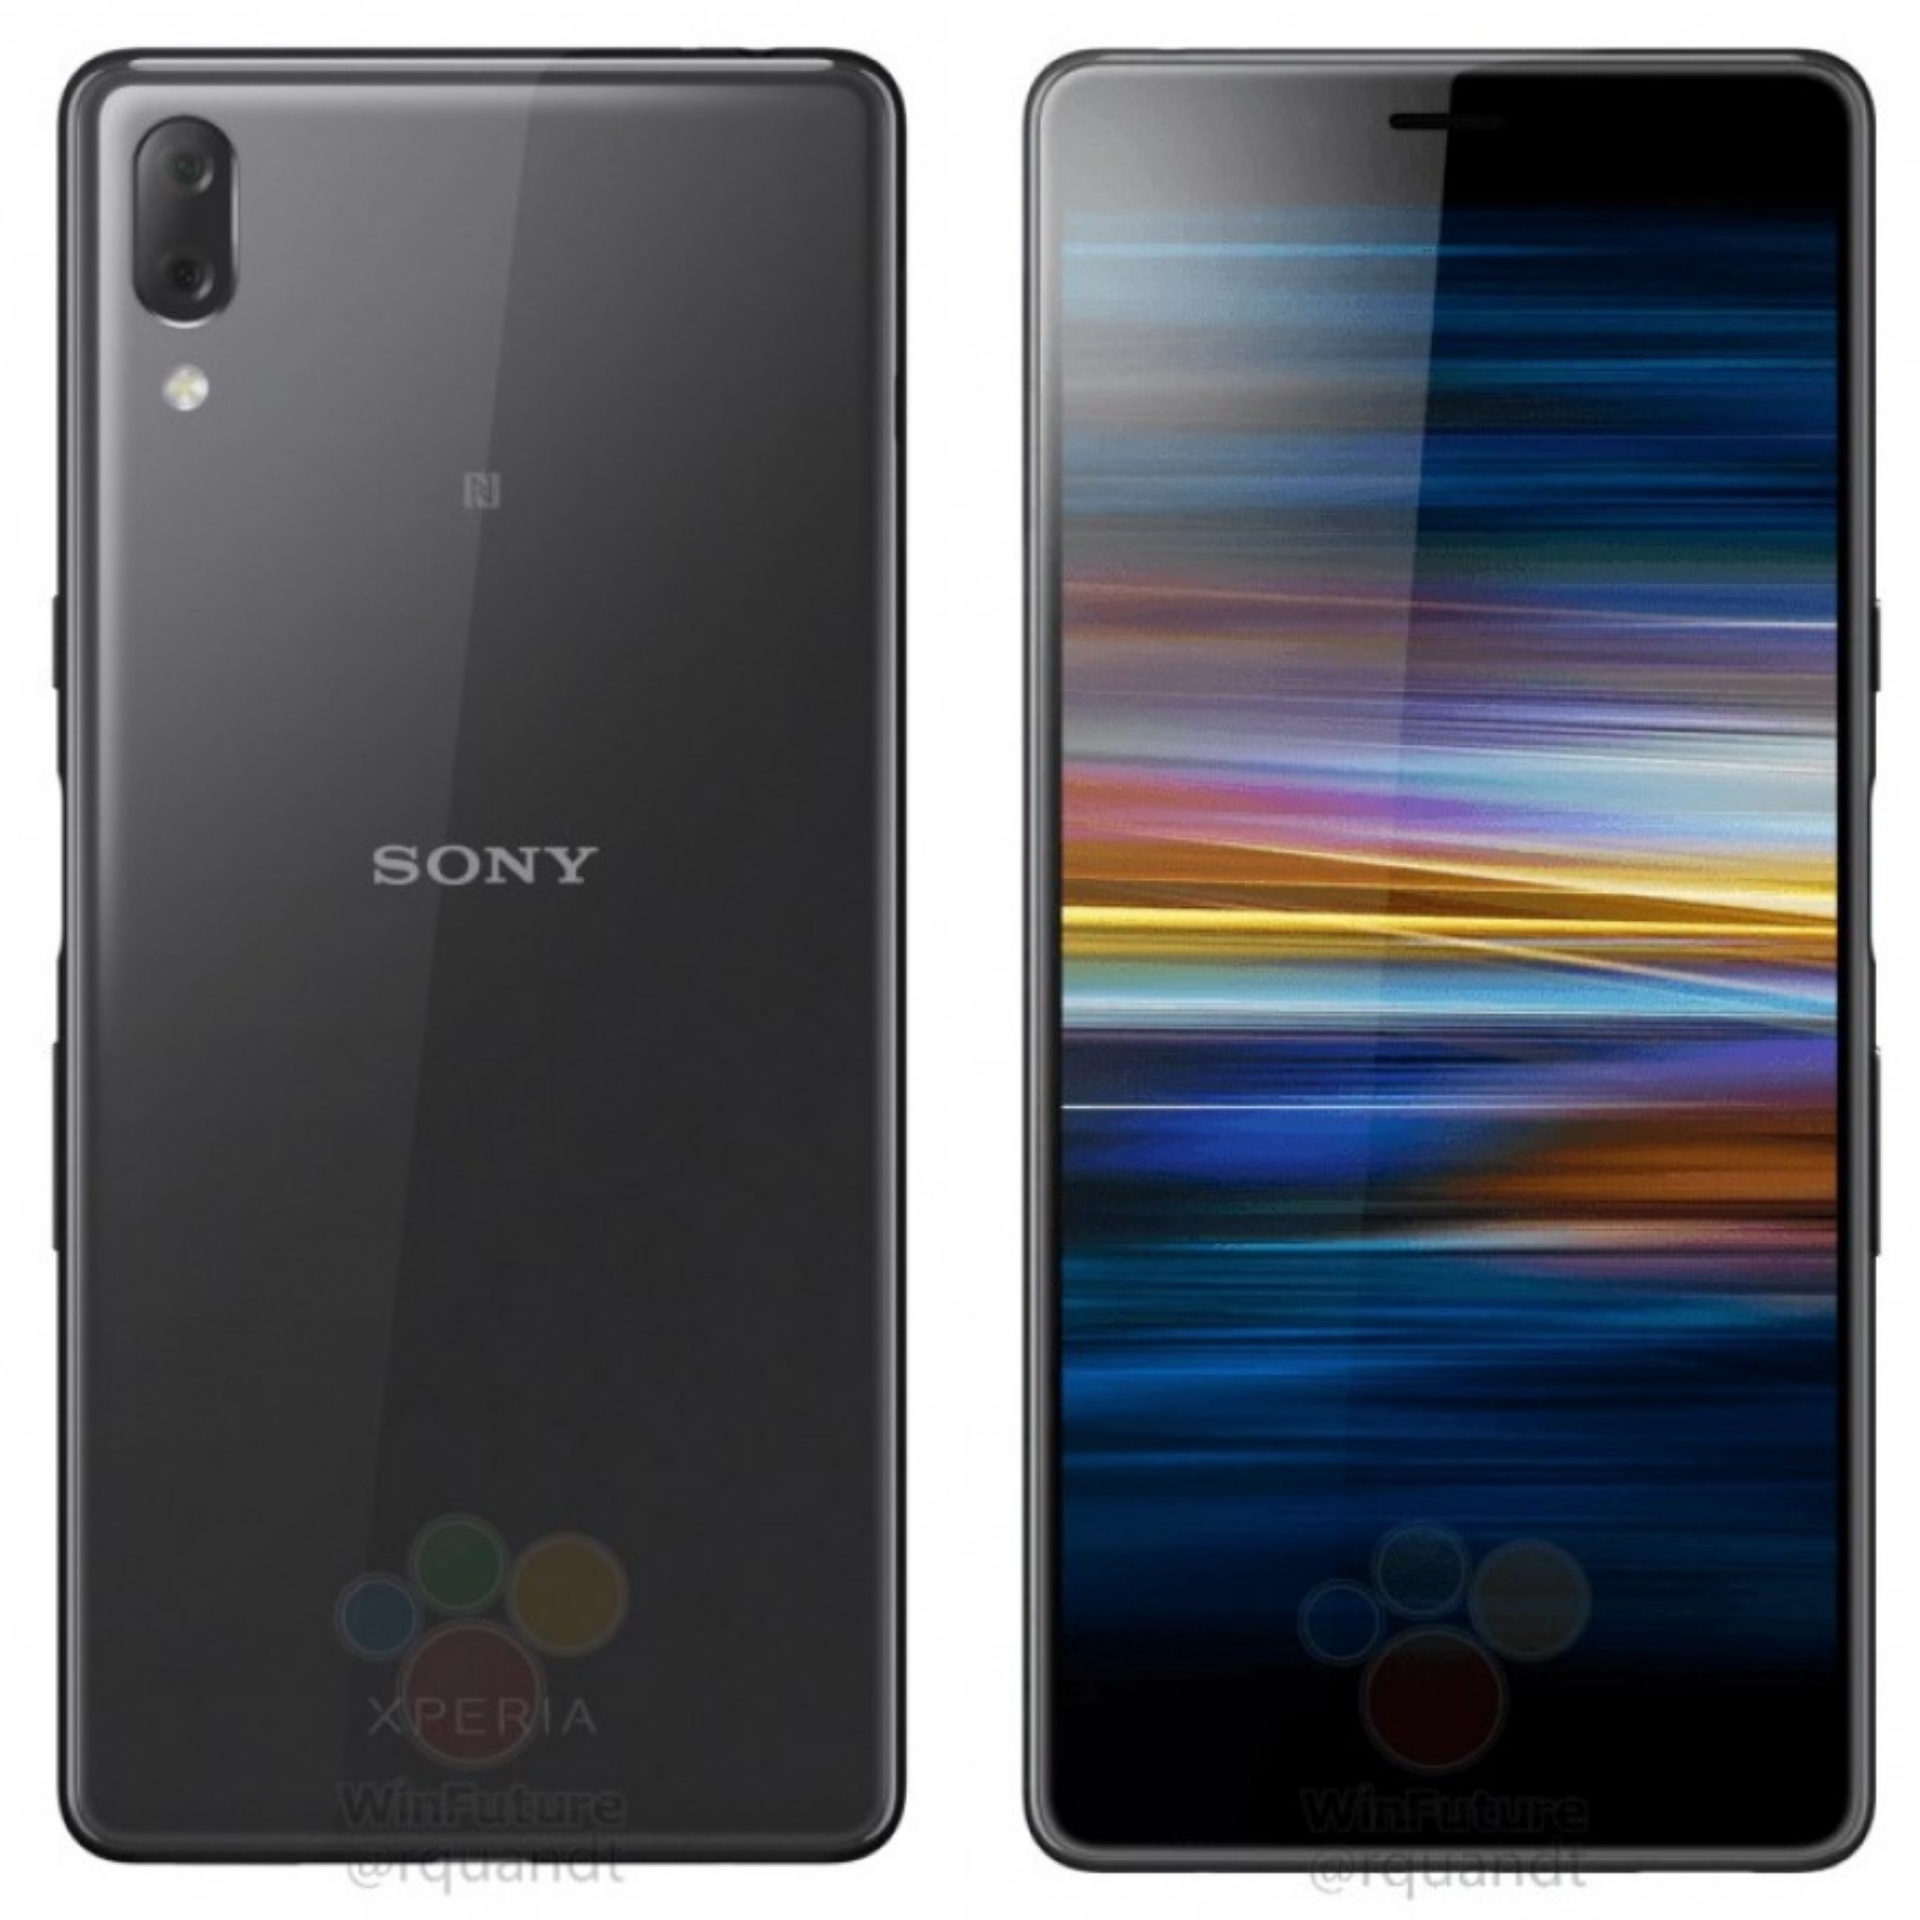 Sony Xperia 8 Specifications [AnTuTu Score]